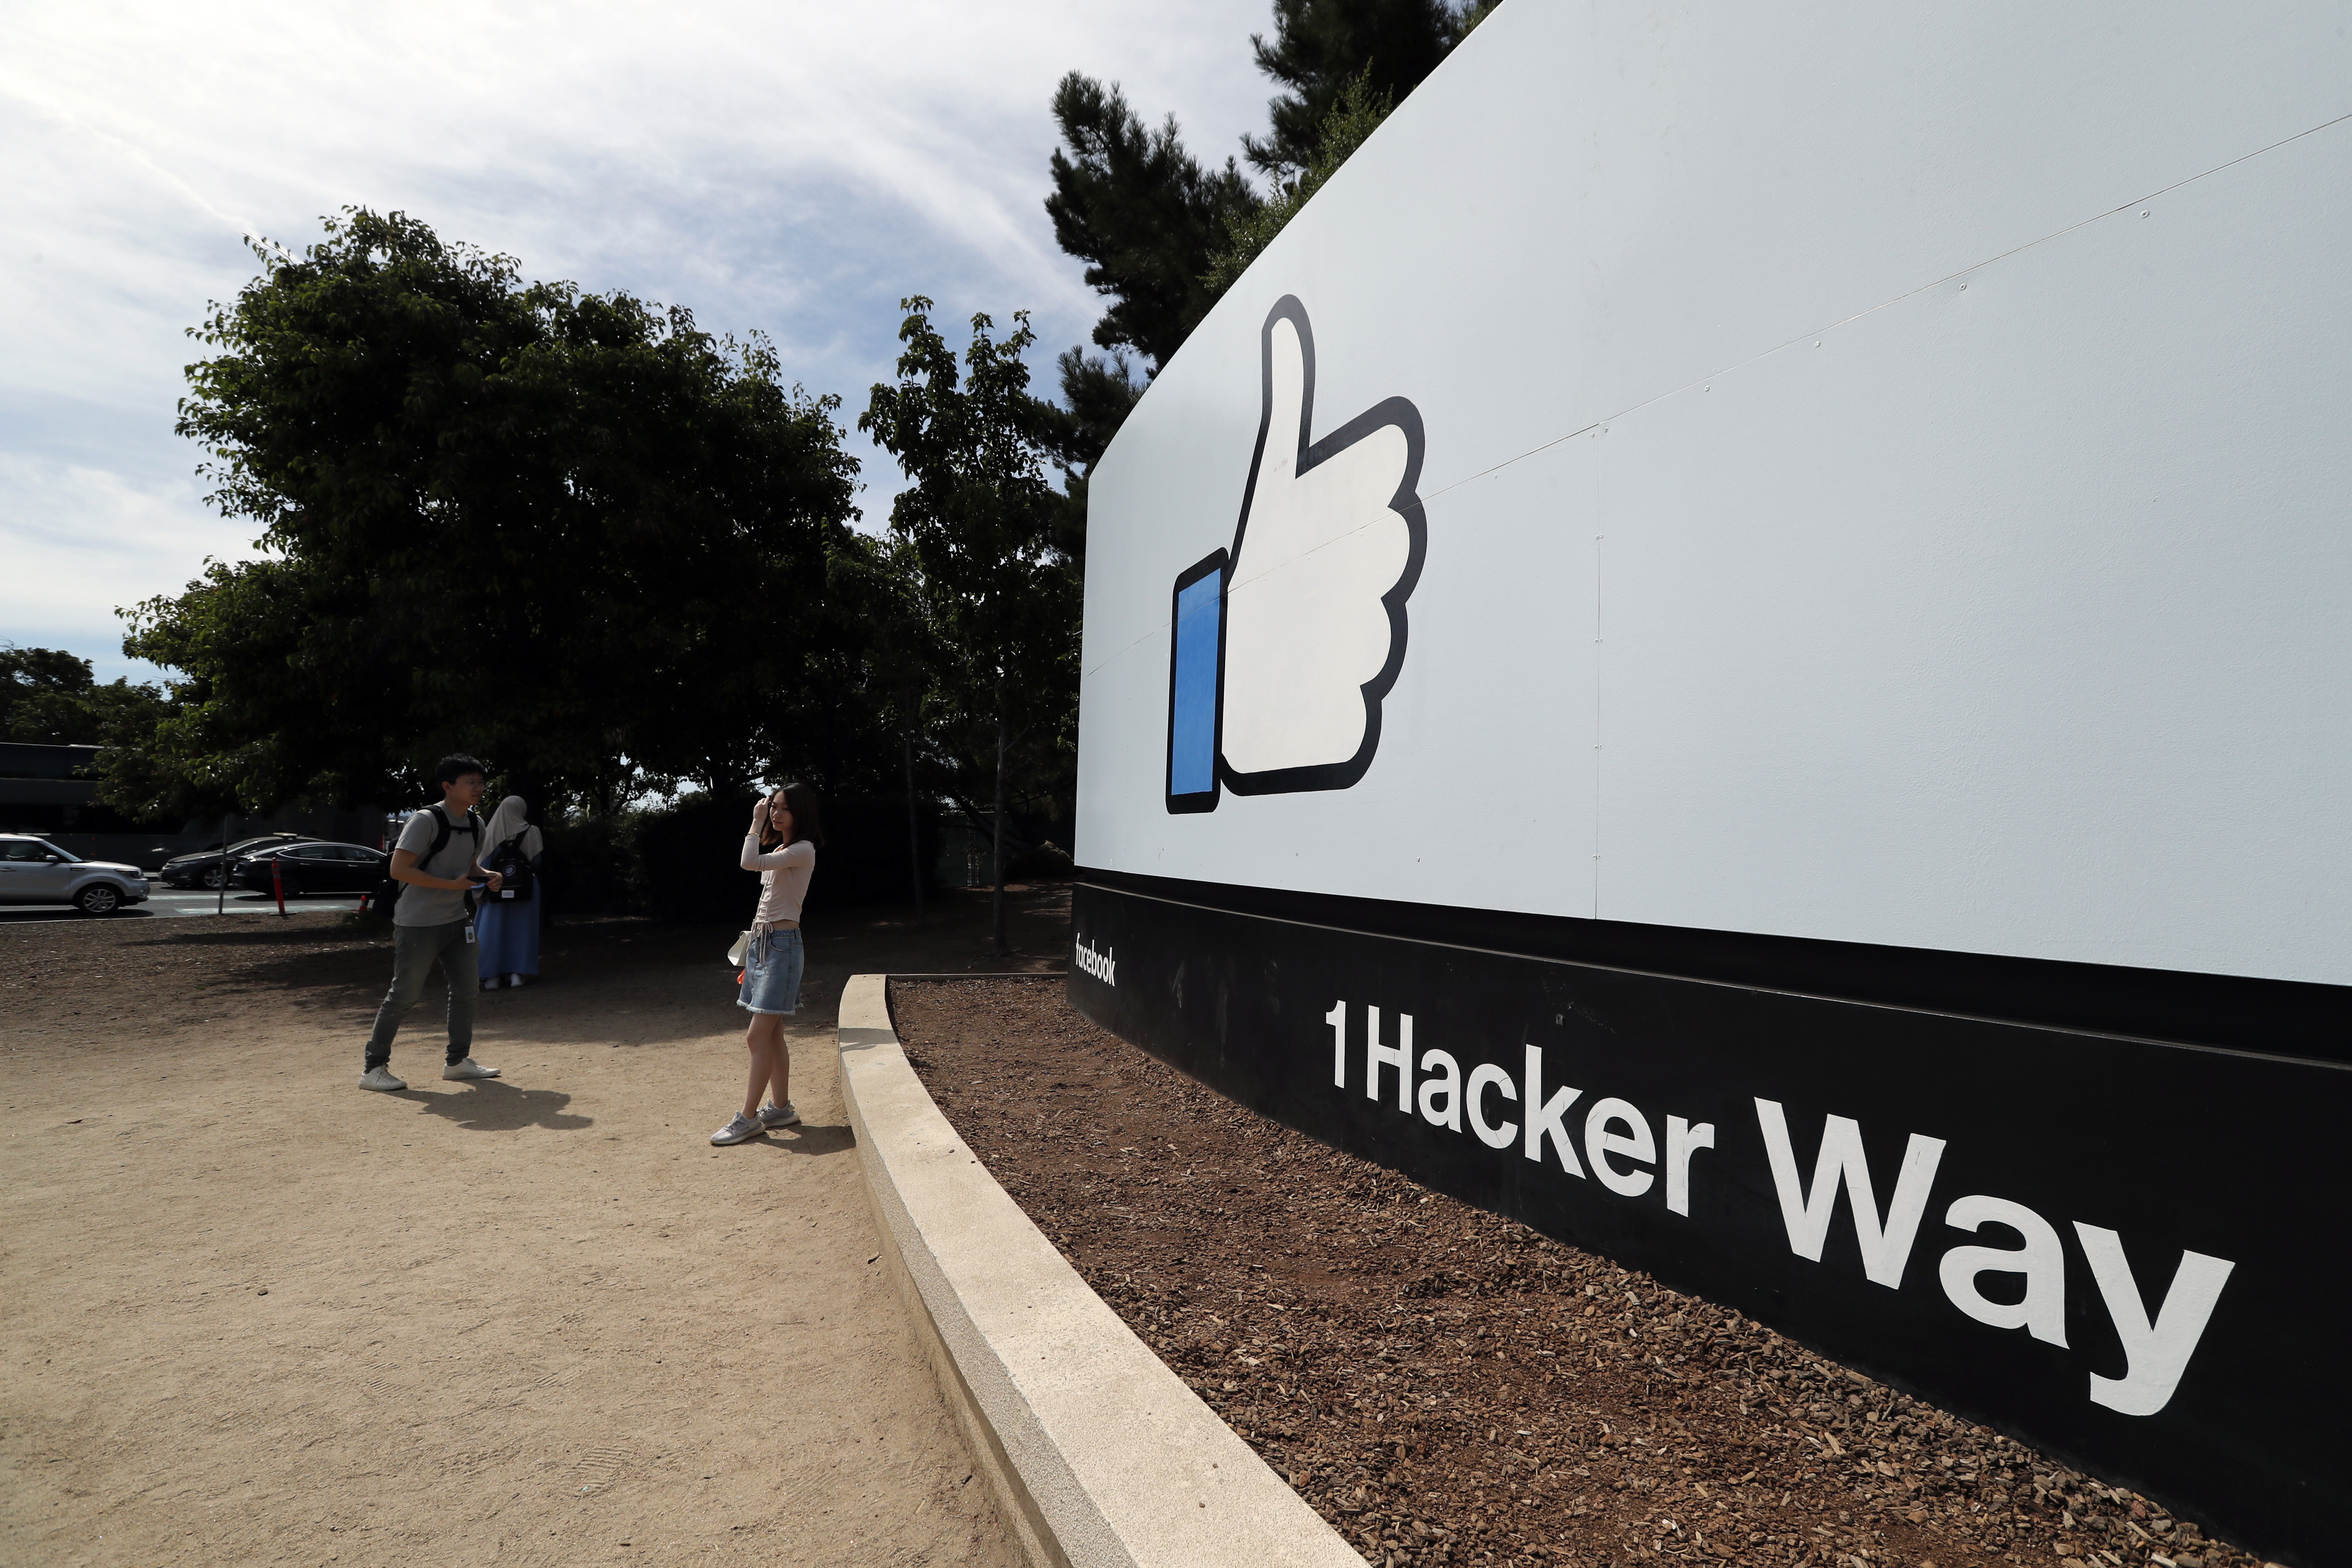 epa07688522 Facebook fans pose in front of a sign at Facebook Headquarters in Menlo Park, California, USA, 01 July 2019. According to reports, an investigation is taking place at the mailing facility of the Facebook Headquarters after a package was suspected of containing sarin poison, the buildings were evacuated.  EPA/JOHN G. MABANGLO